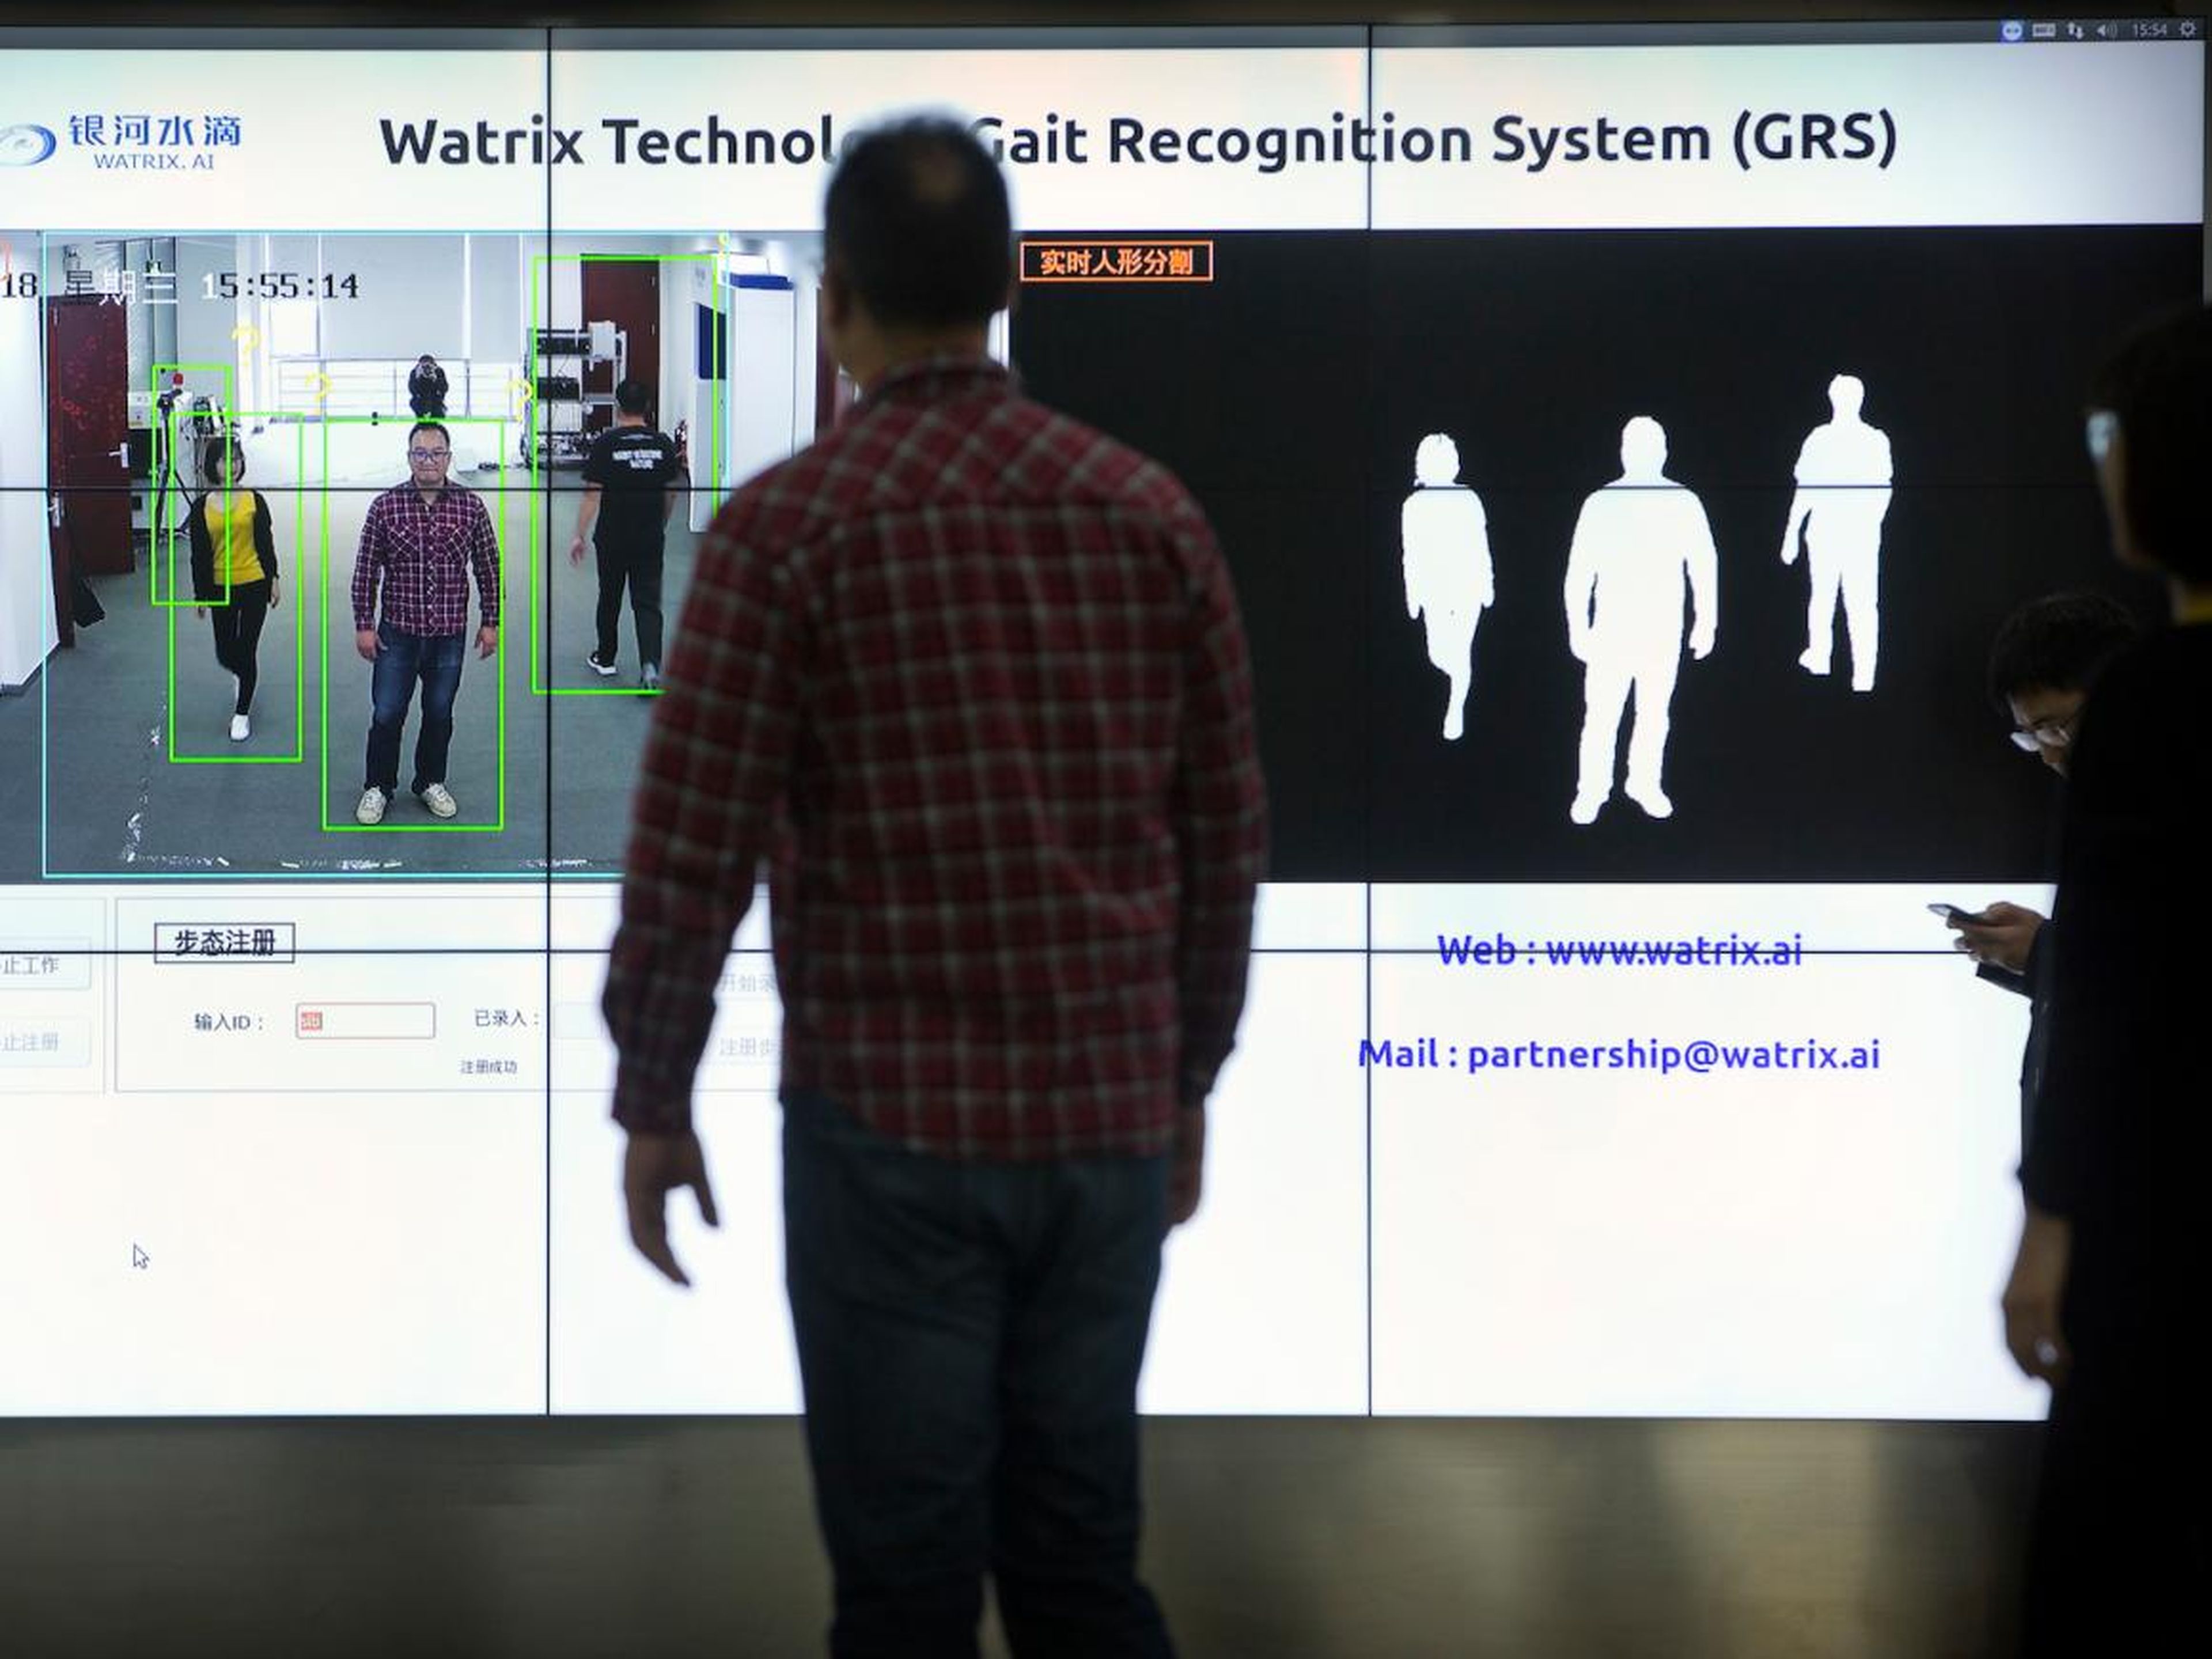 Facial recognition is on the rise, but artificial intelligence is already being trained to recognize humans in new ways — including gait detection and heartbeat sensors